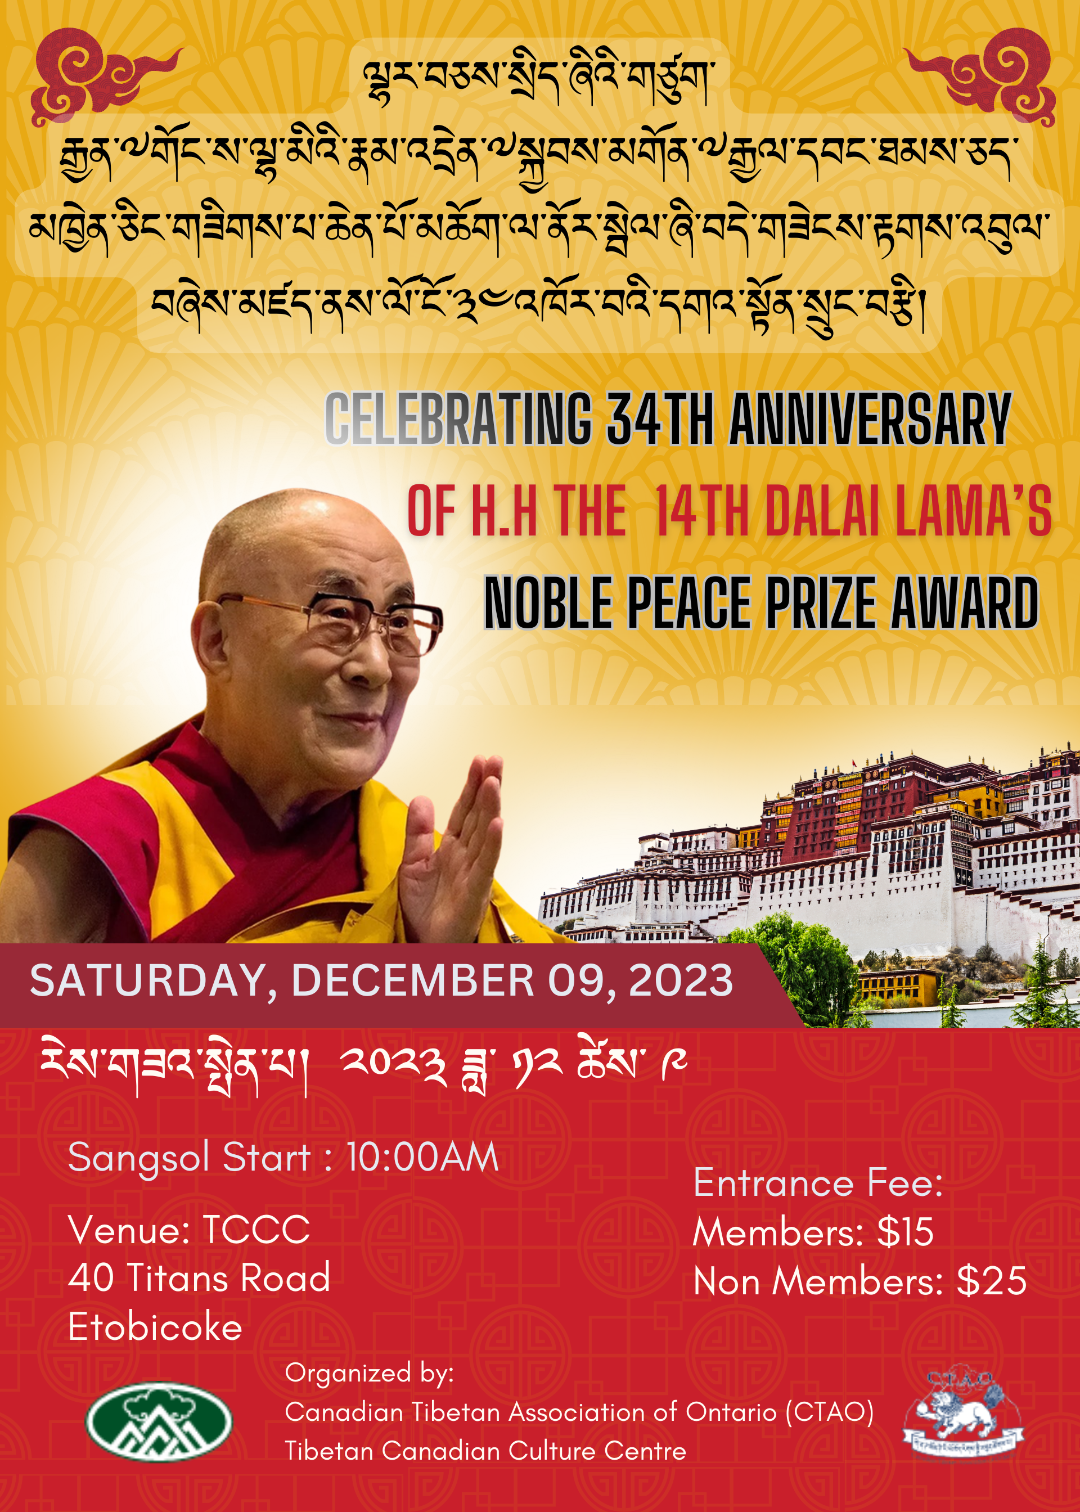 Celebrating 34th Anniversary Of The Nobel Peace Prize Awarded To His Holiness The 14th Dalai Lama – December 09 2023, Saturday.